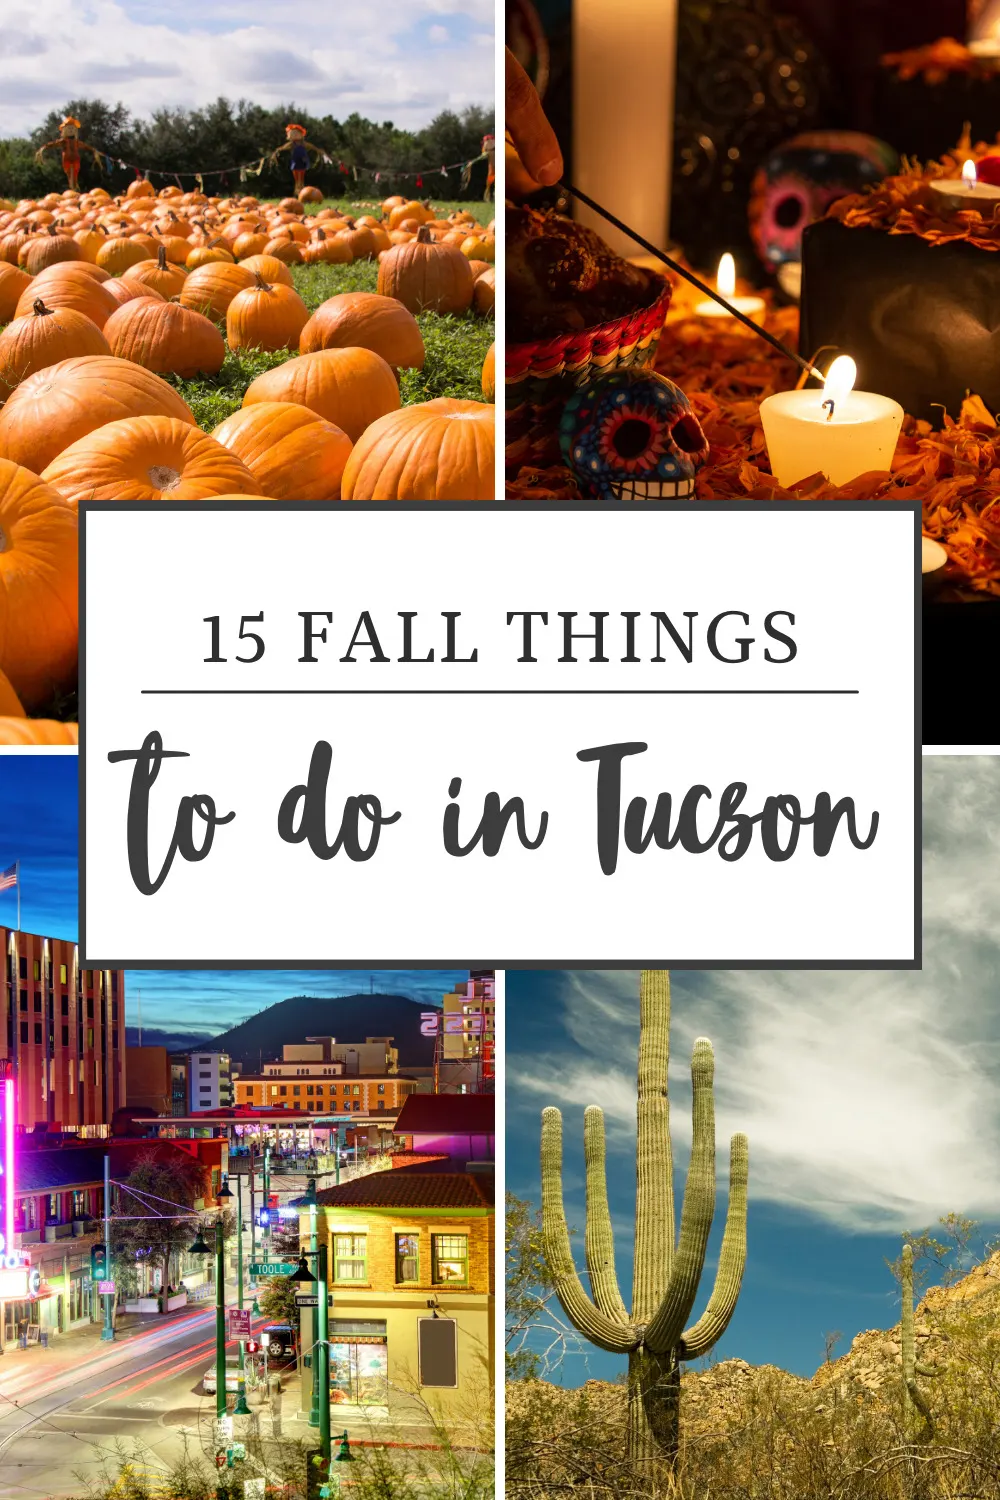 15 fall things to do in tucson.jpg